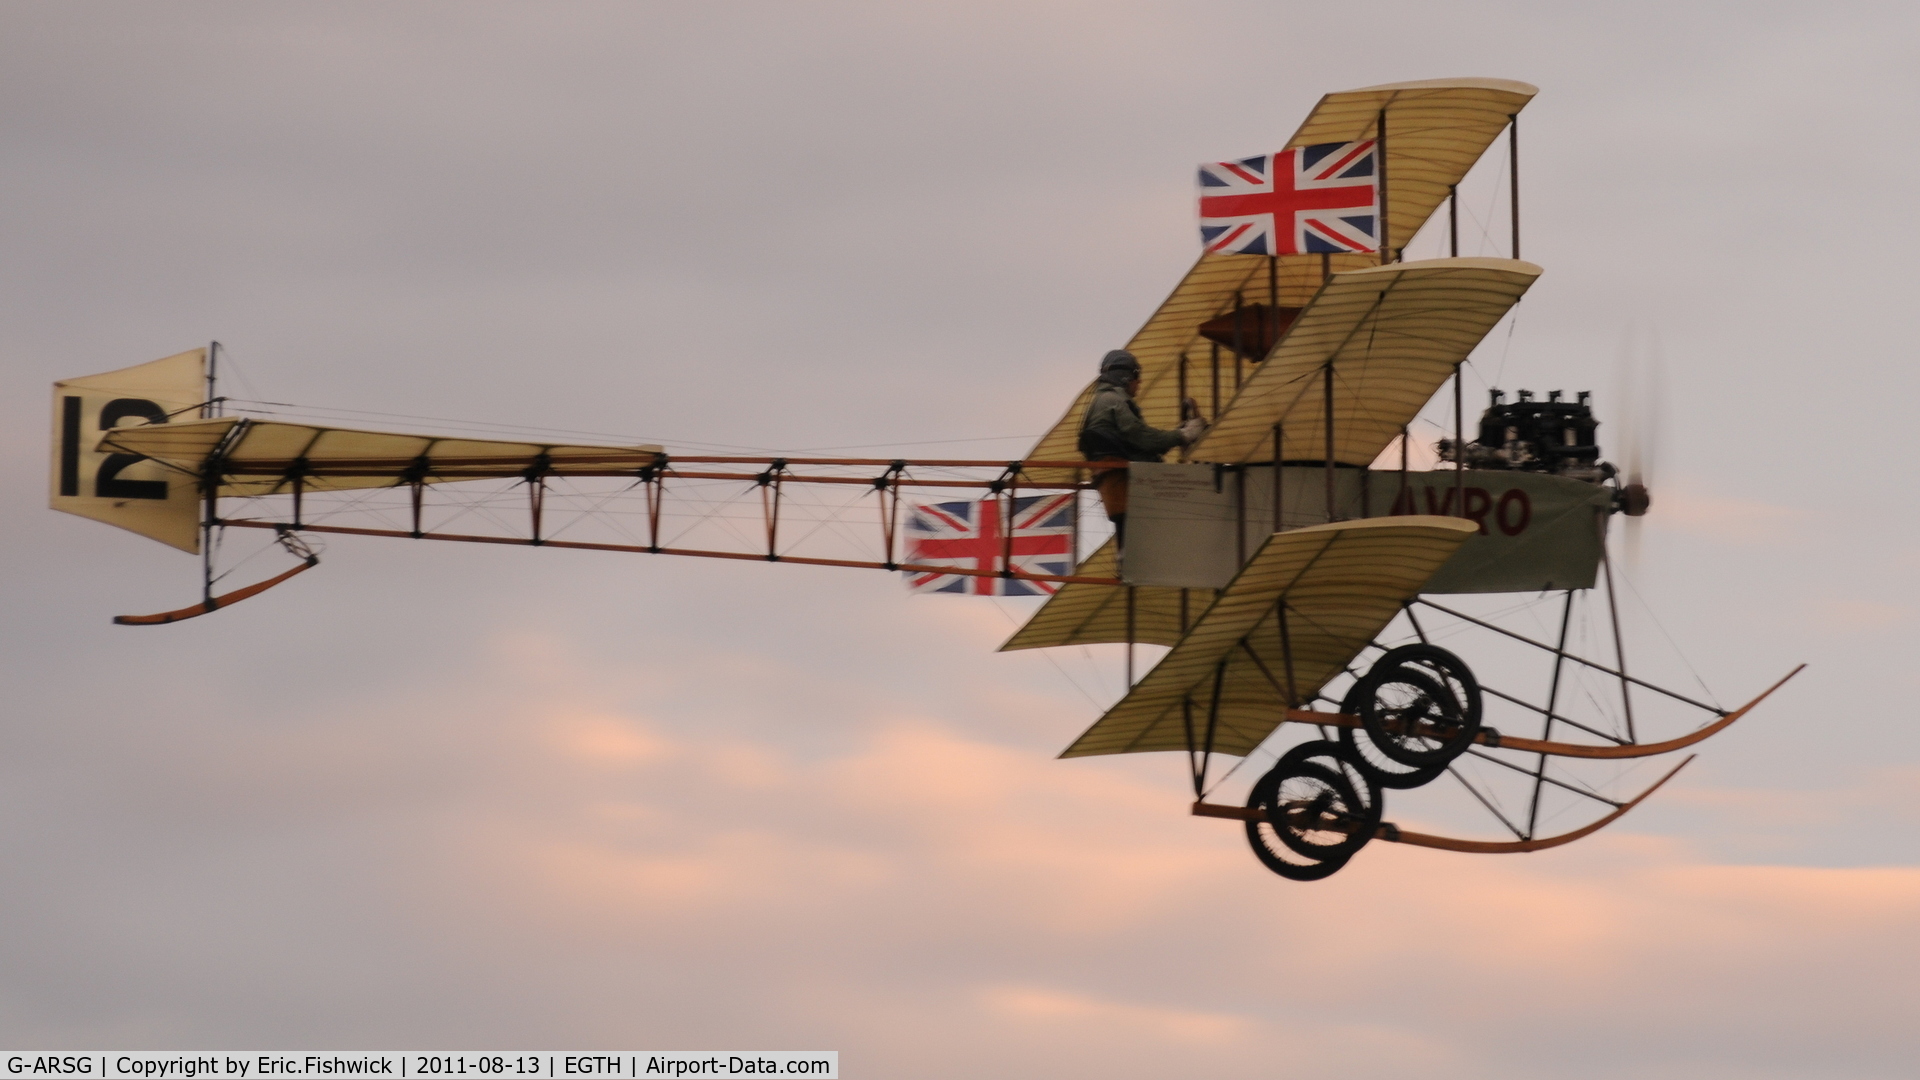 G-ARSG, 1964 Avro Roe Triplane Type IV replica C/N TRI.1, 42. G-ARSG sunset flying at a classic Shuttleworth Evening Air Display, August 2011